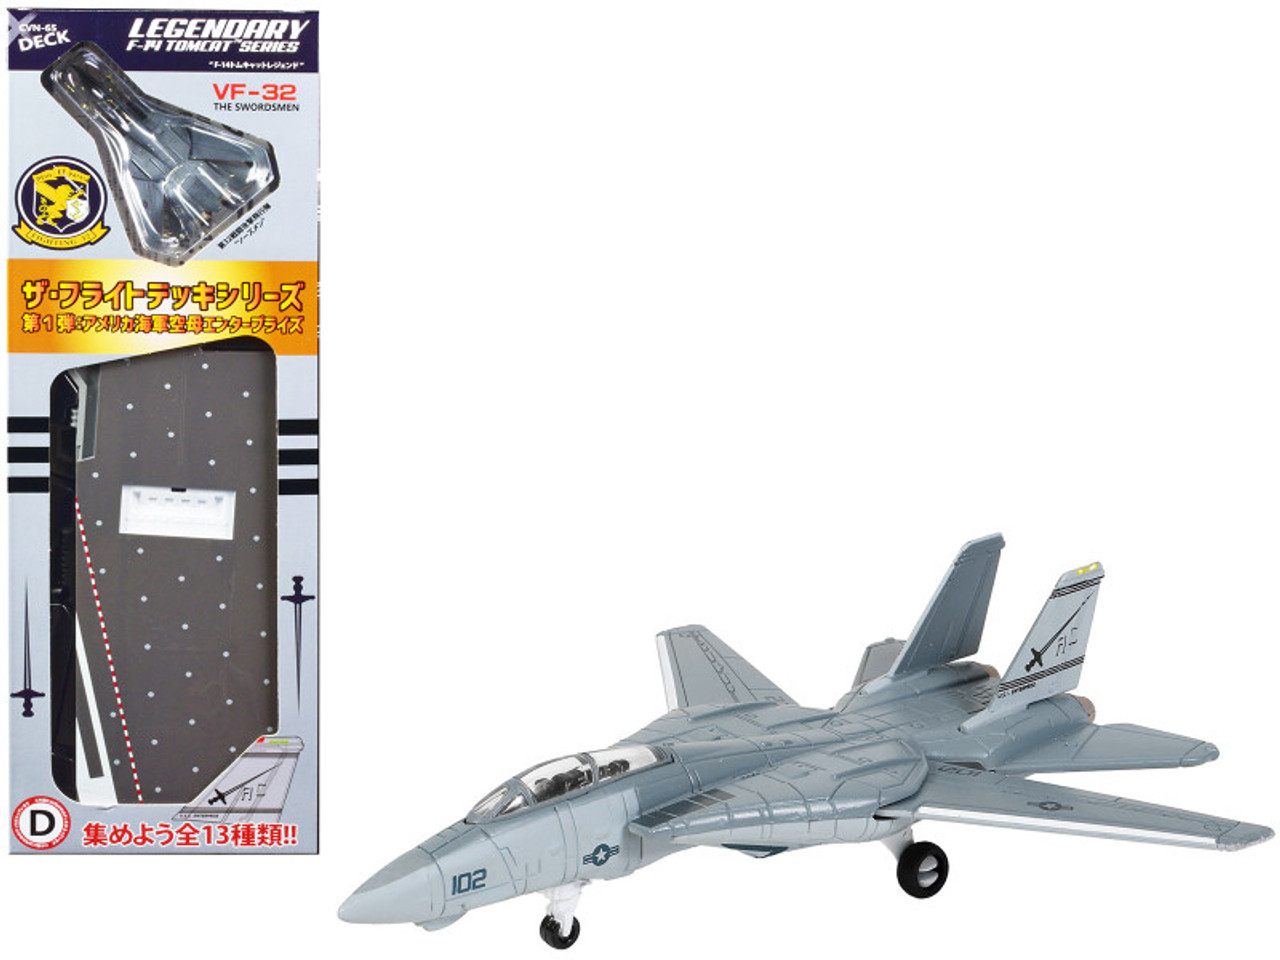 Grumman F-14 Tomcat Fighter Aircraft "VF-32 The Swordsmen" and Section D of USS Enterprise (CVN-65) Aircraft Carrier Display Deck "Legendary F-14 Tomcat" Series 1/200 Diecast Model by Forces of Valor